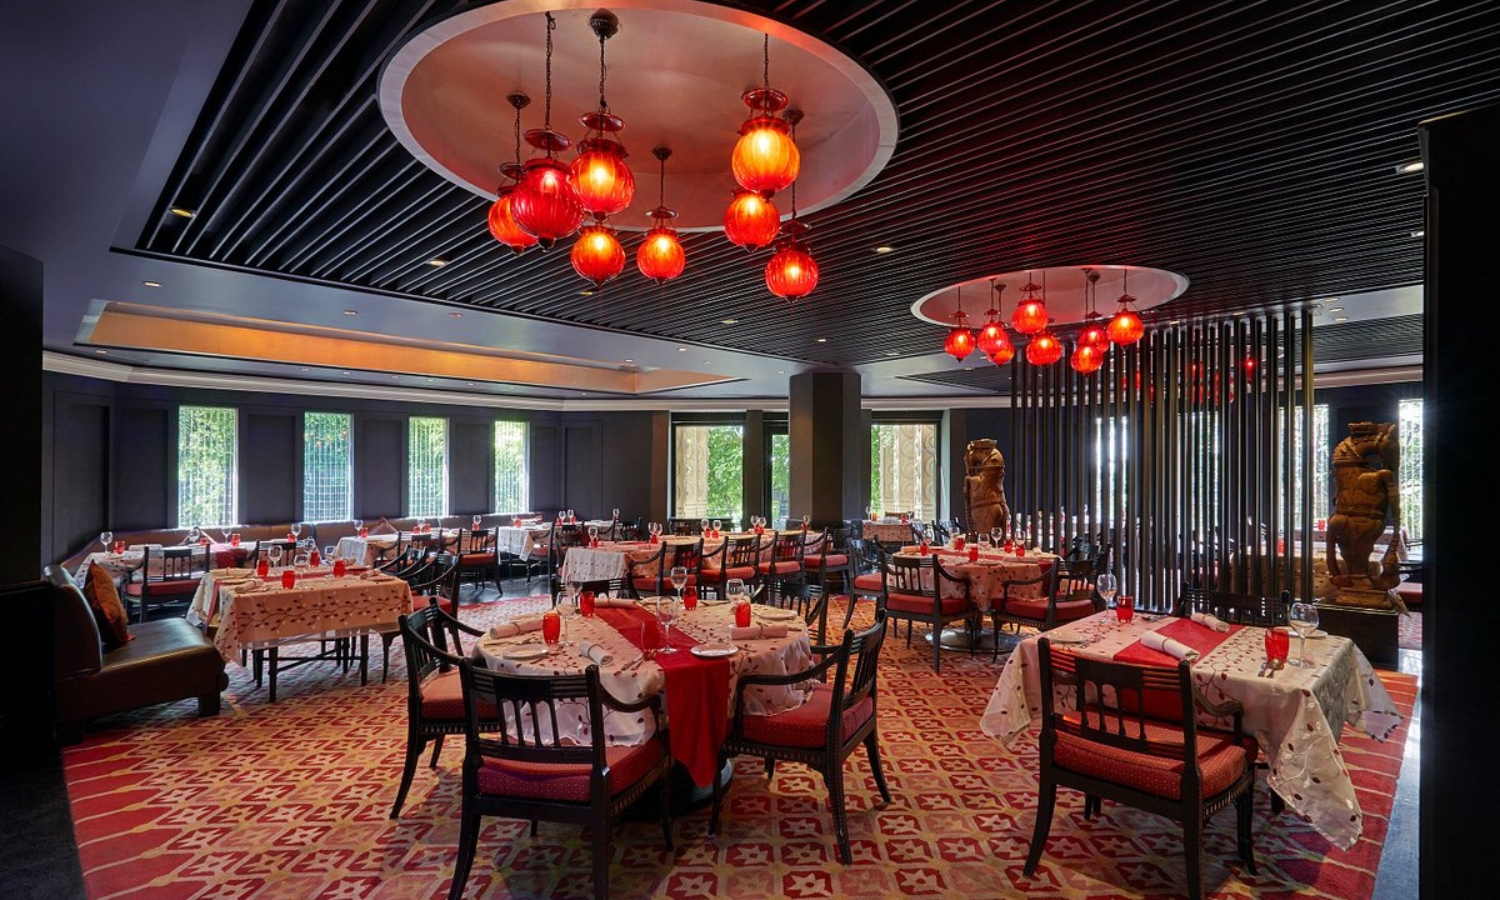 Asia's Top Restaurants Revealed: 3 Indian Eateries Make the Cut